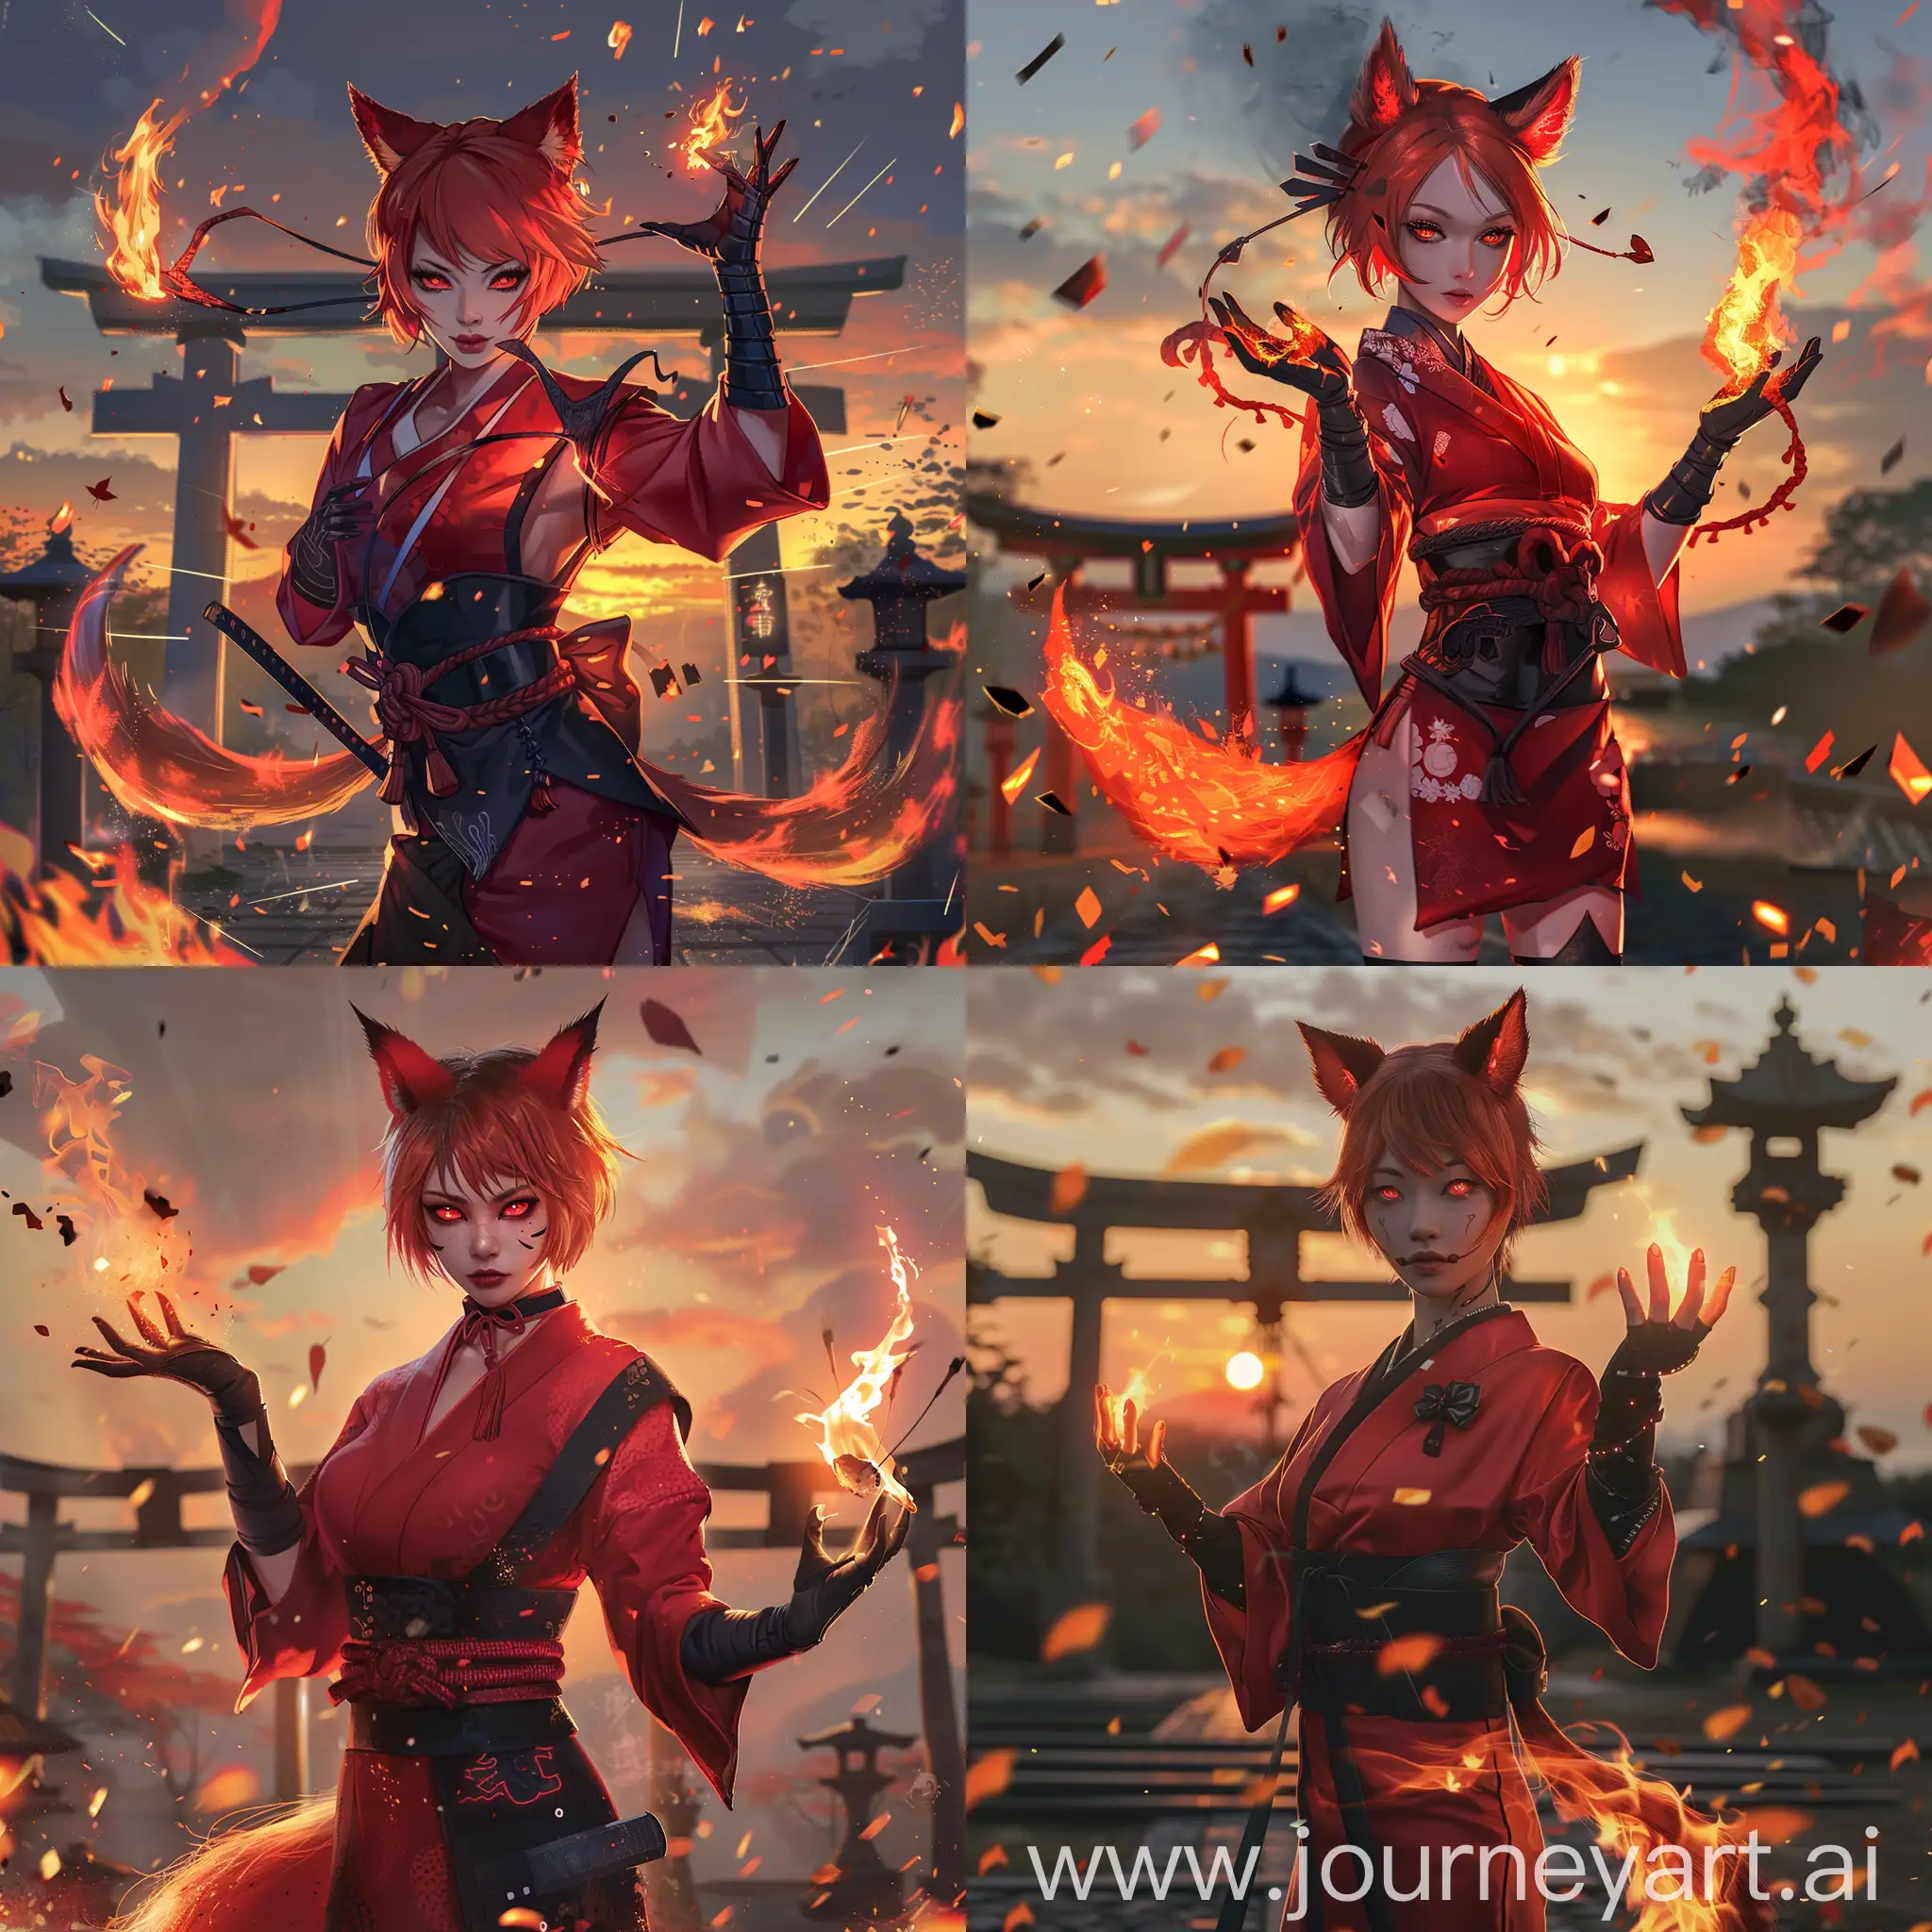 anime-style, full body, athletic, beautiful, light skin, asian woman, short fiery red hair, red fox ears, red fox tail attached to her waist, fiery red eyes, wearing a red kimono, black hakama, black sash, long black gloves, black leather boots, casting fire magic, hands wrapped in fire,  good anatomy, dynamic, embers falling in foreground, shinto shrine, sunset